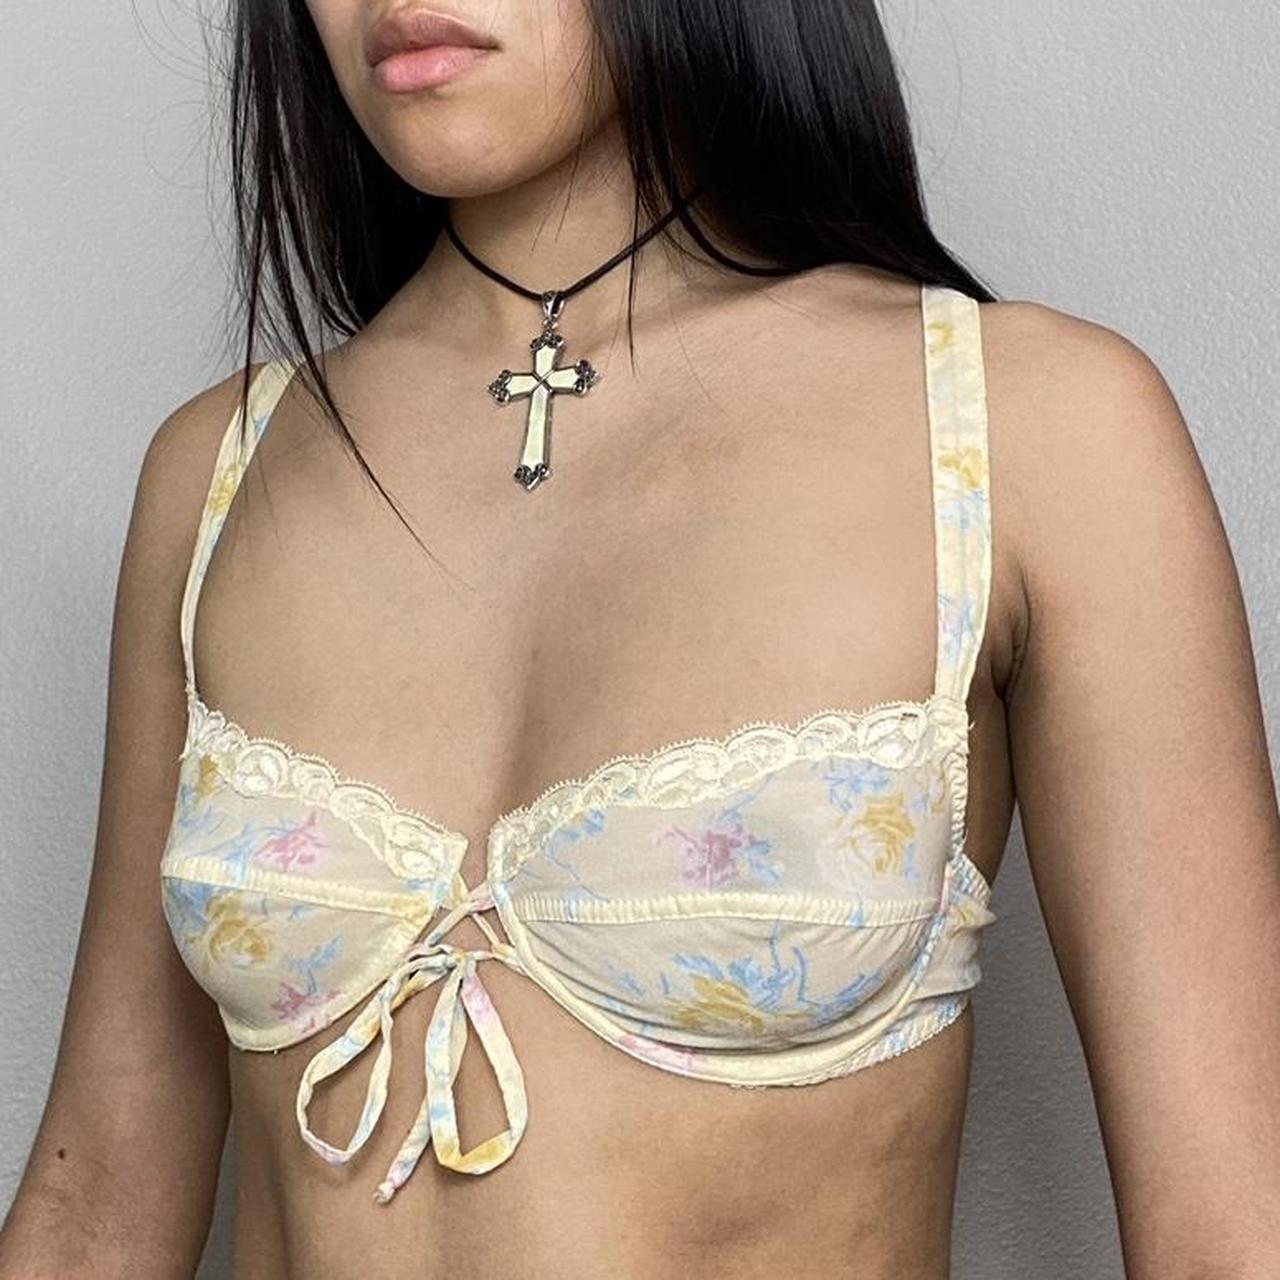 💙DEPOP PAYMENTS ONLY💙 Gooseberry Intimates lace bra - Depop